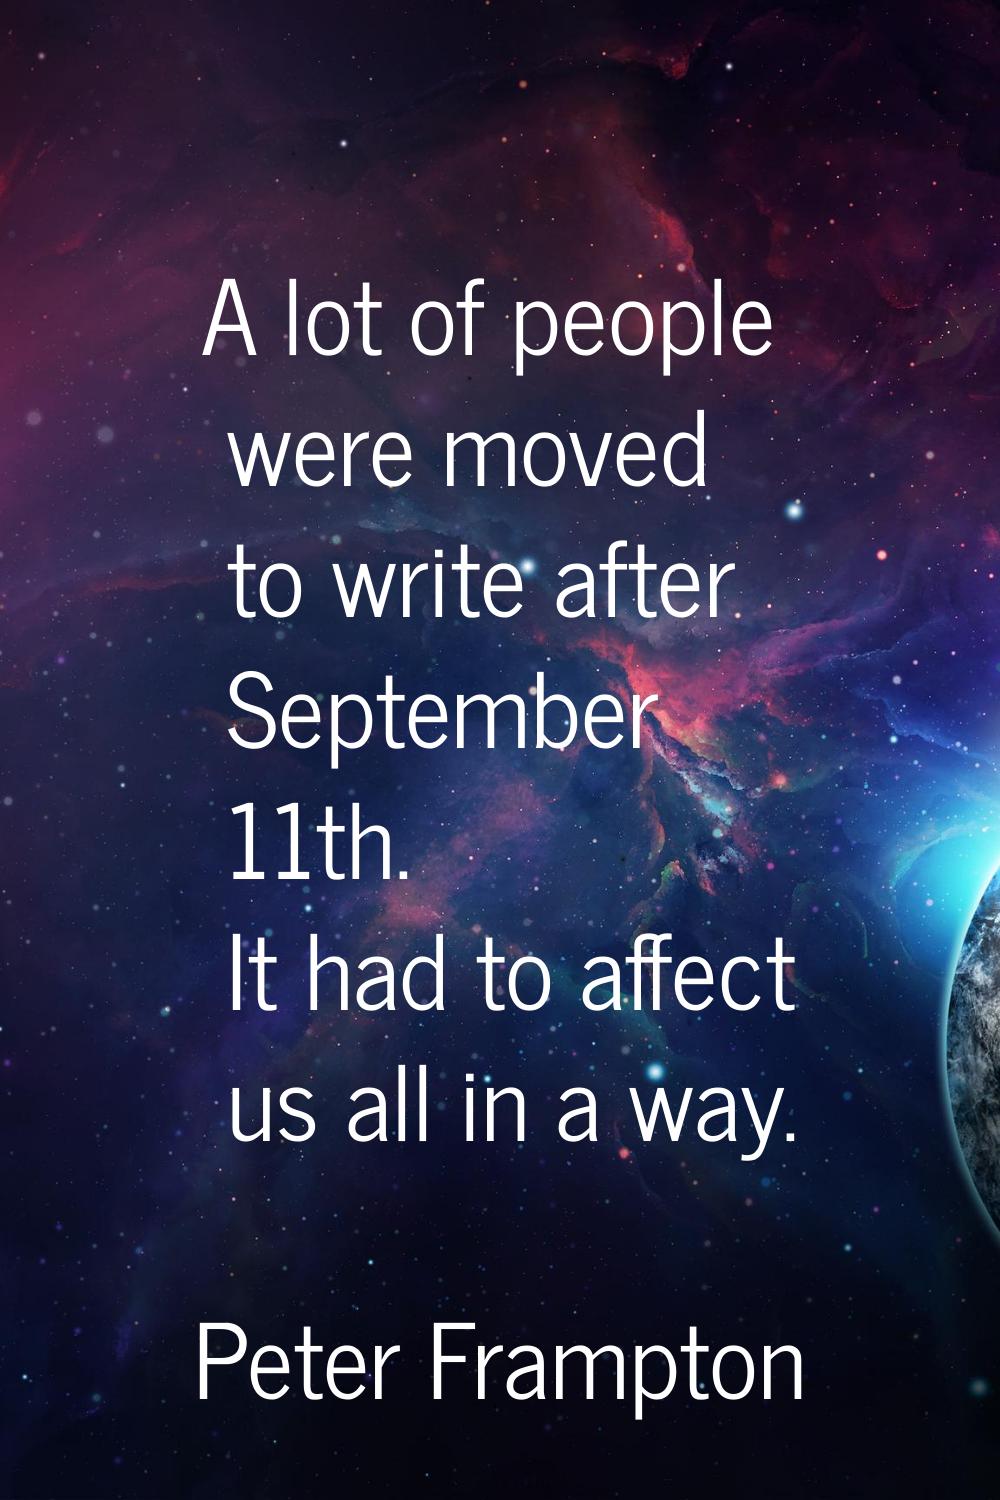 A lot of people were moved to write after September 11th. It had to affect us all in a way.